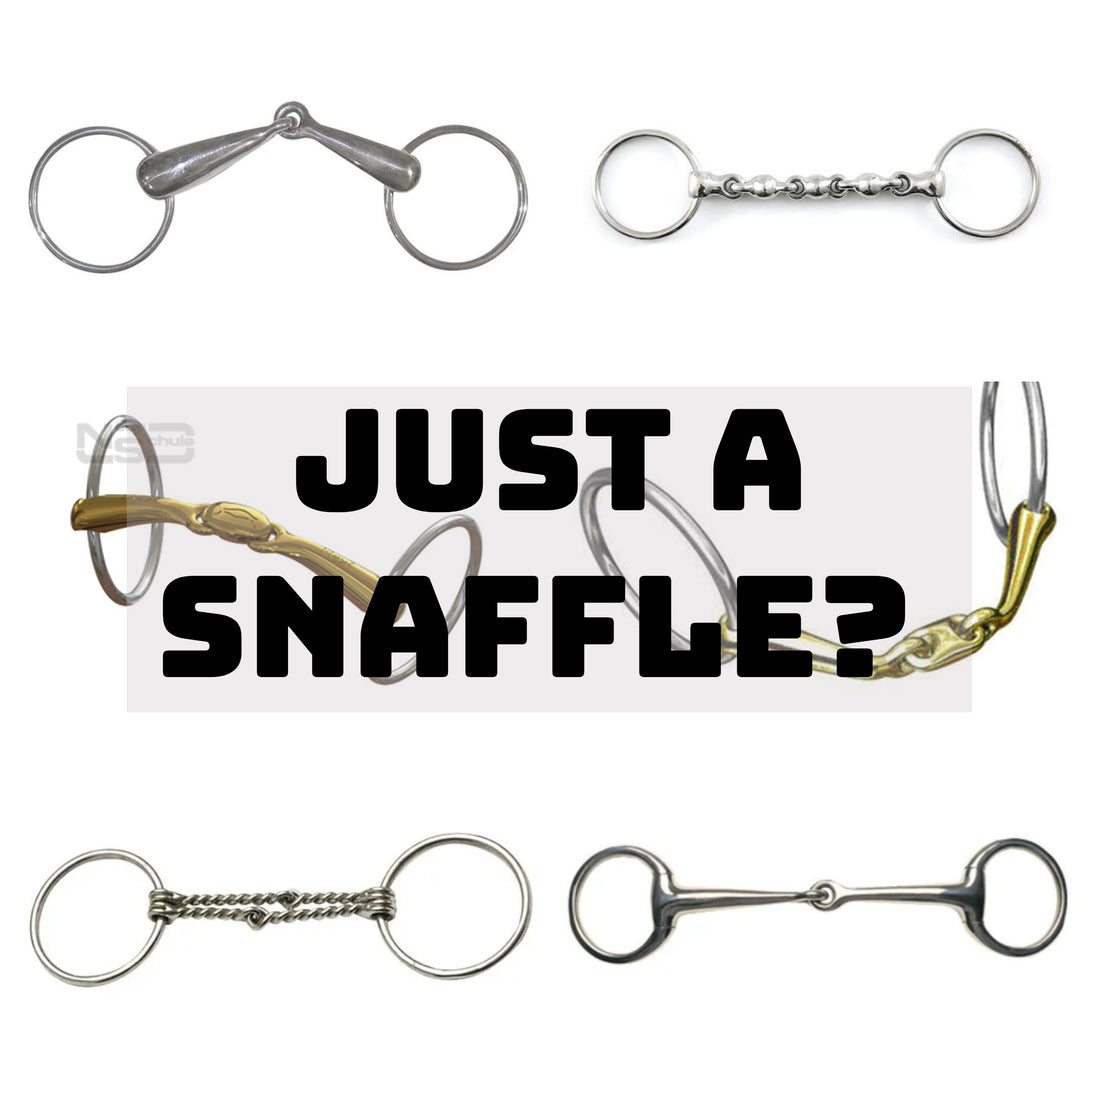 Breaking Down The Humble Snaffle